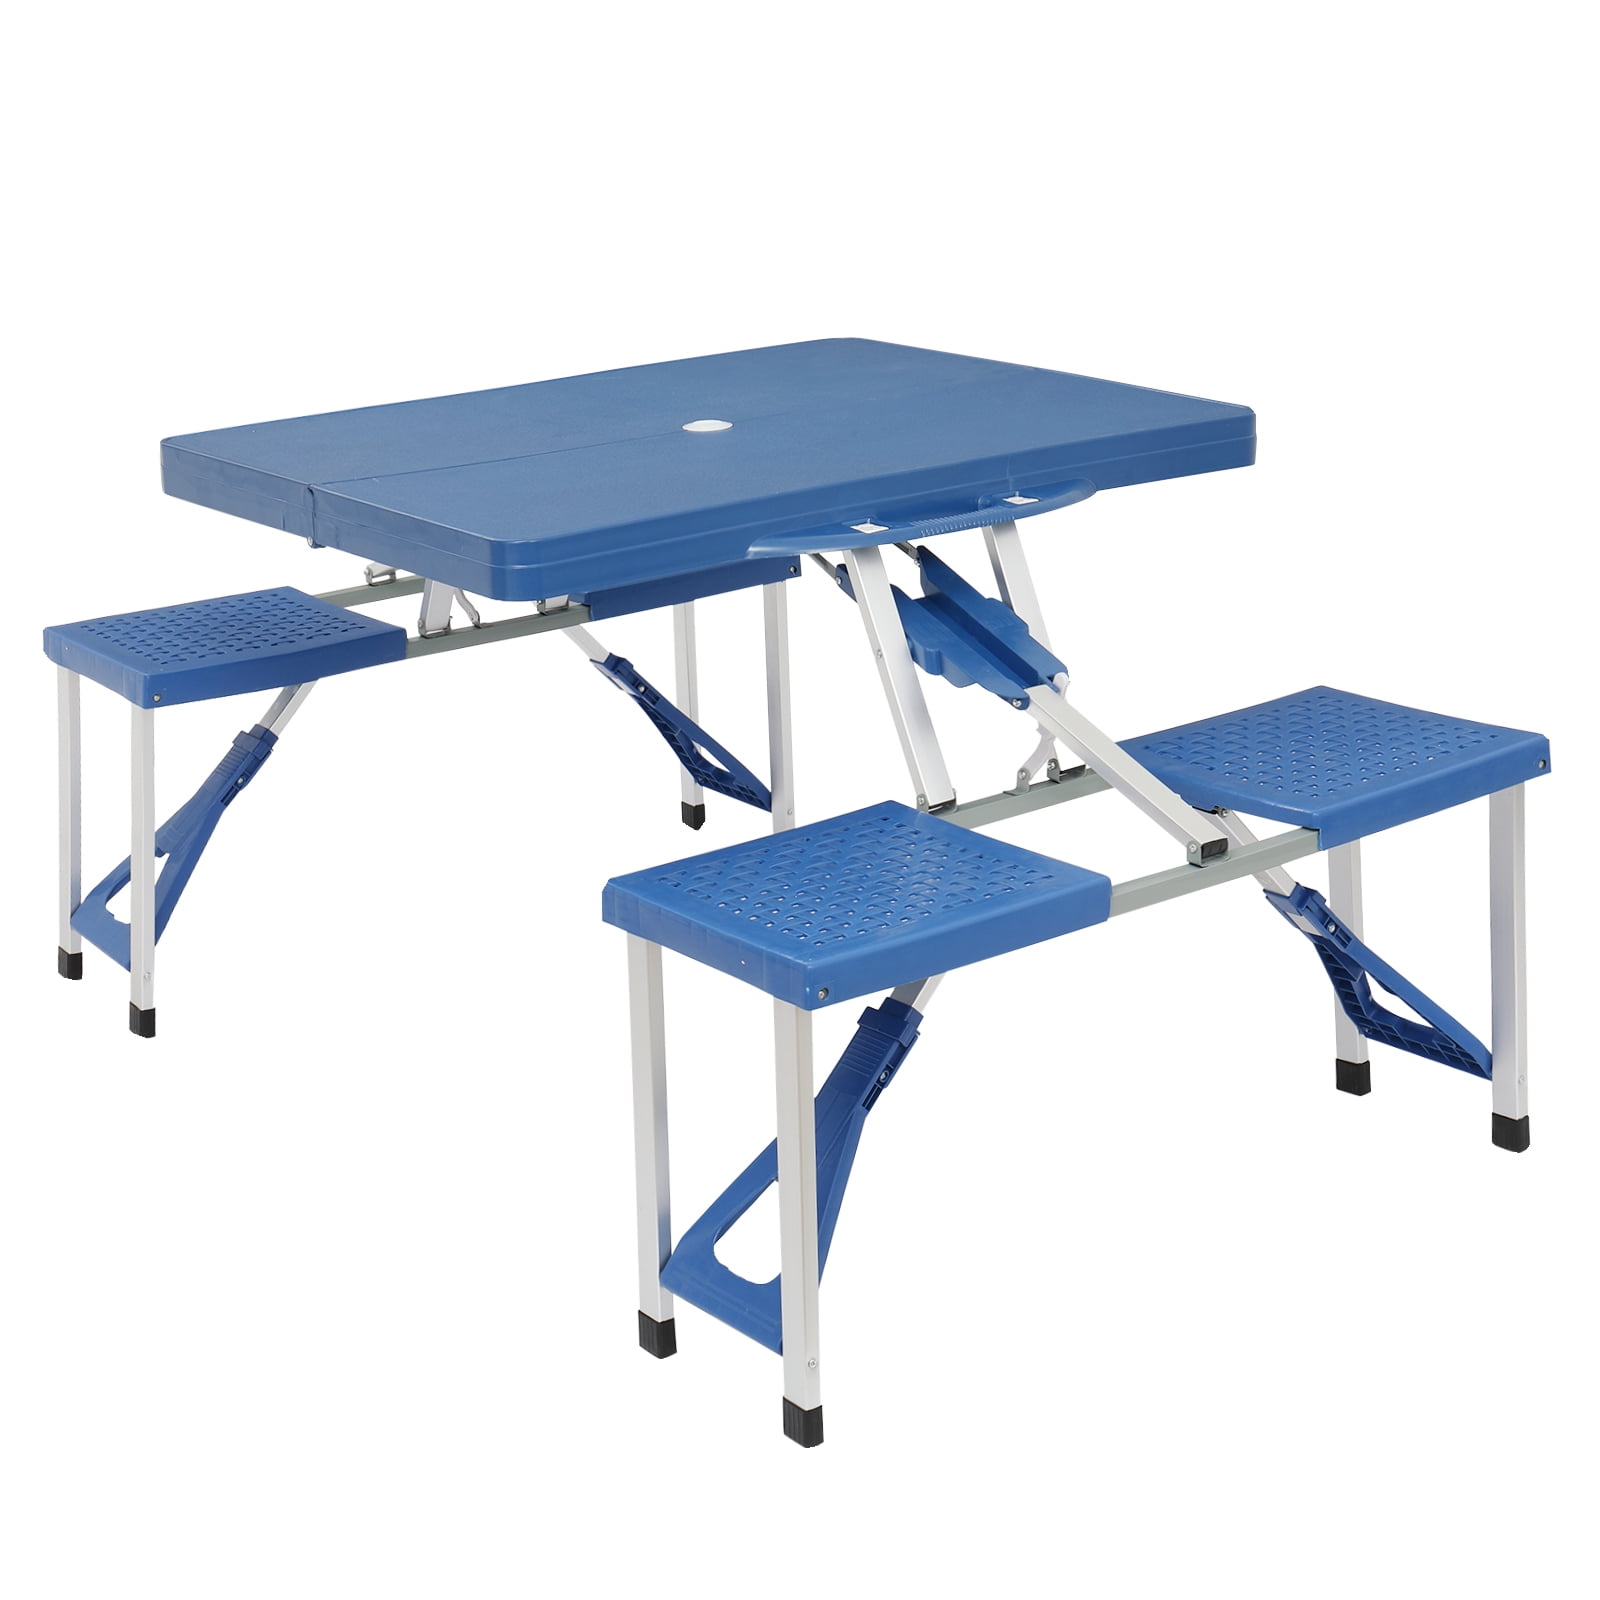 Portable Foldable Camping Picnic Table Bench Set Outdoor Metal BBQ Stool Stable 